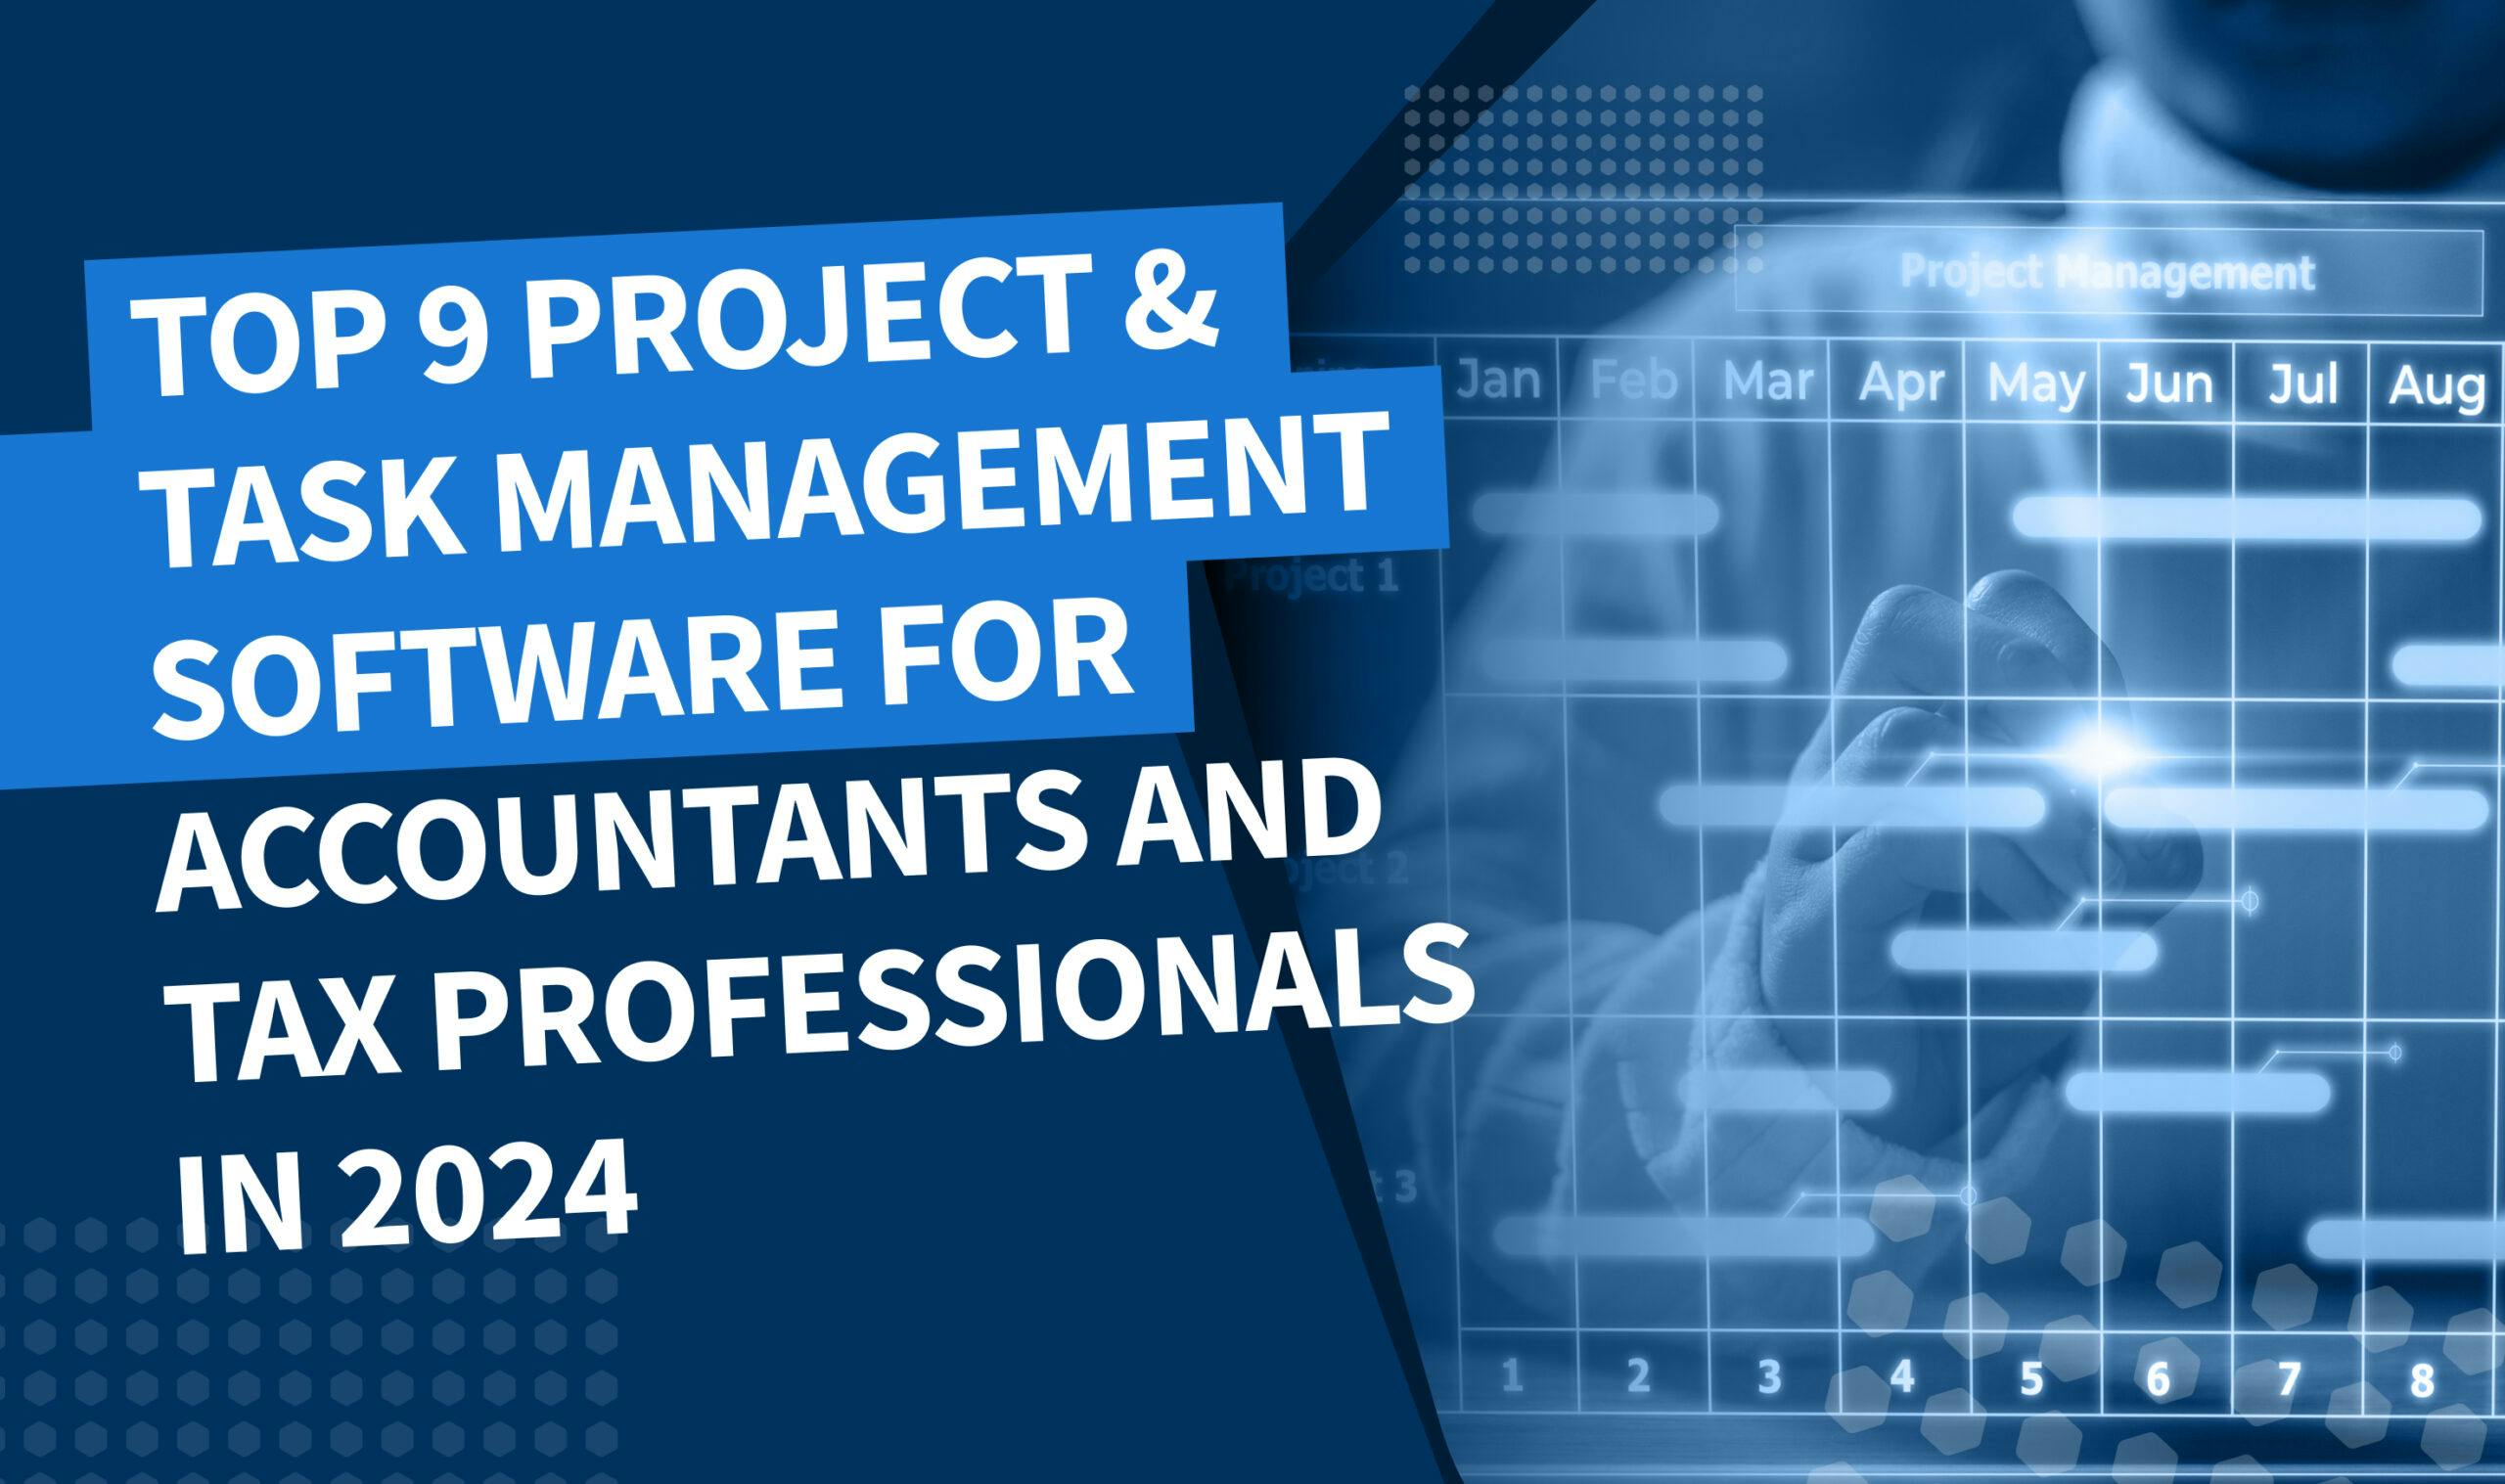 Top 9 project & task management software for accountants and tax professionals in 2024